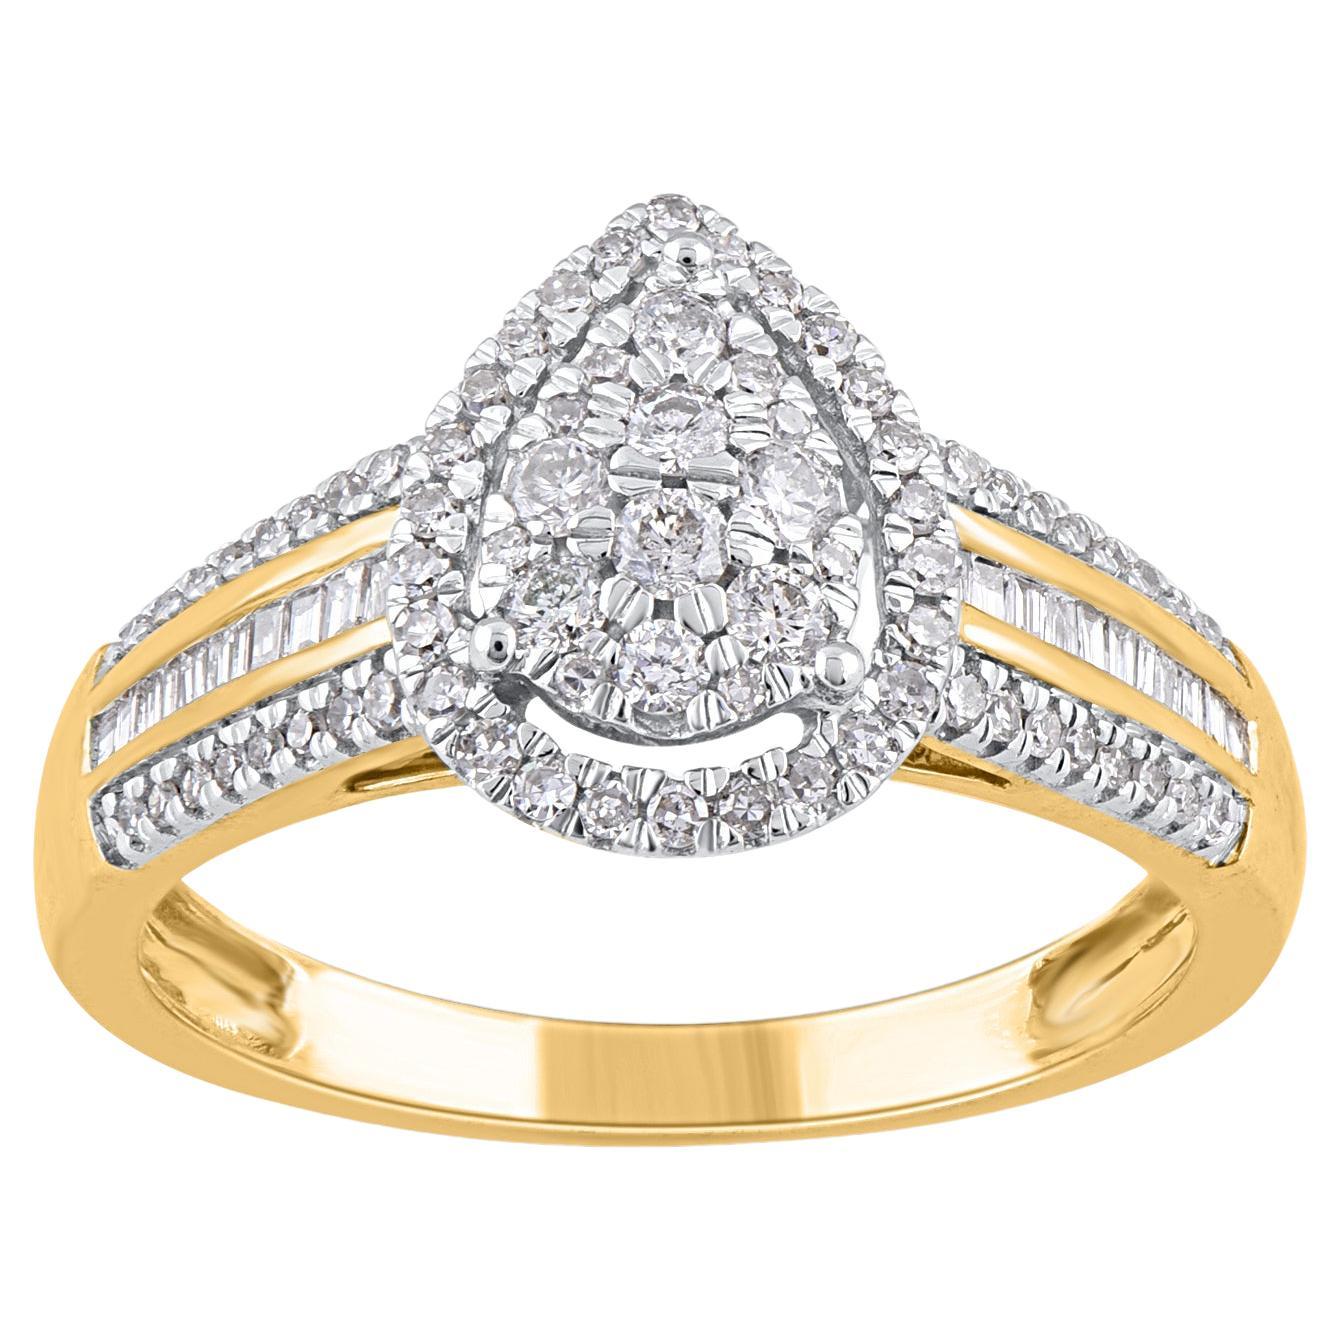 TJD 0.50 Carat Baguette & Round Diamond 14KT Yellow Gold Pear Shape Halo Ring